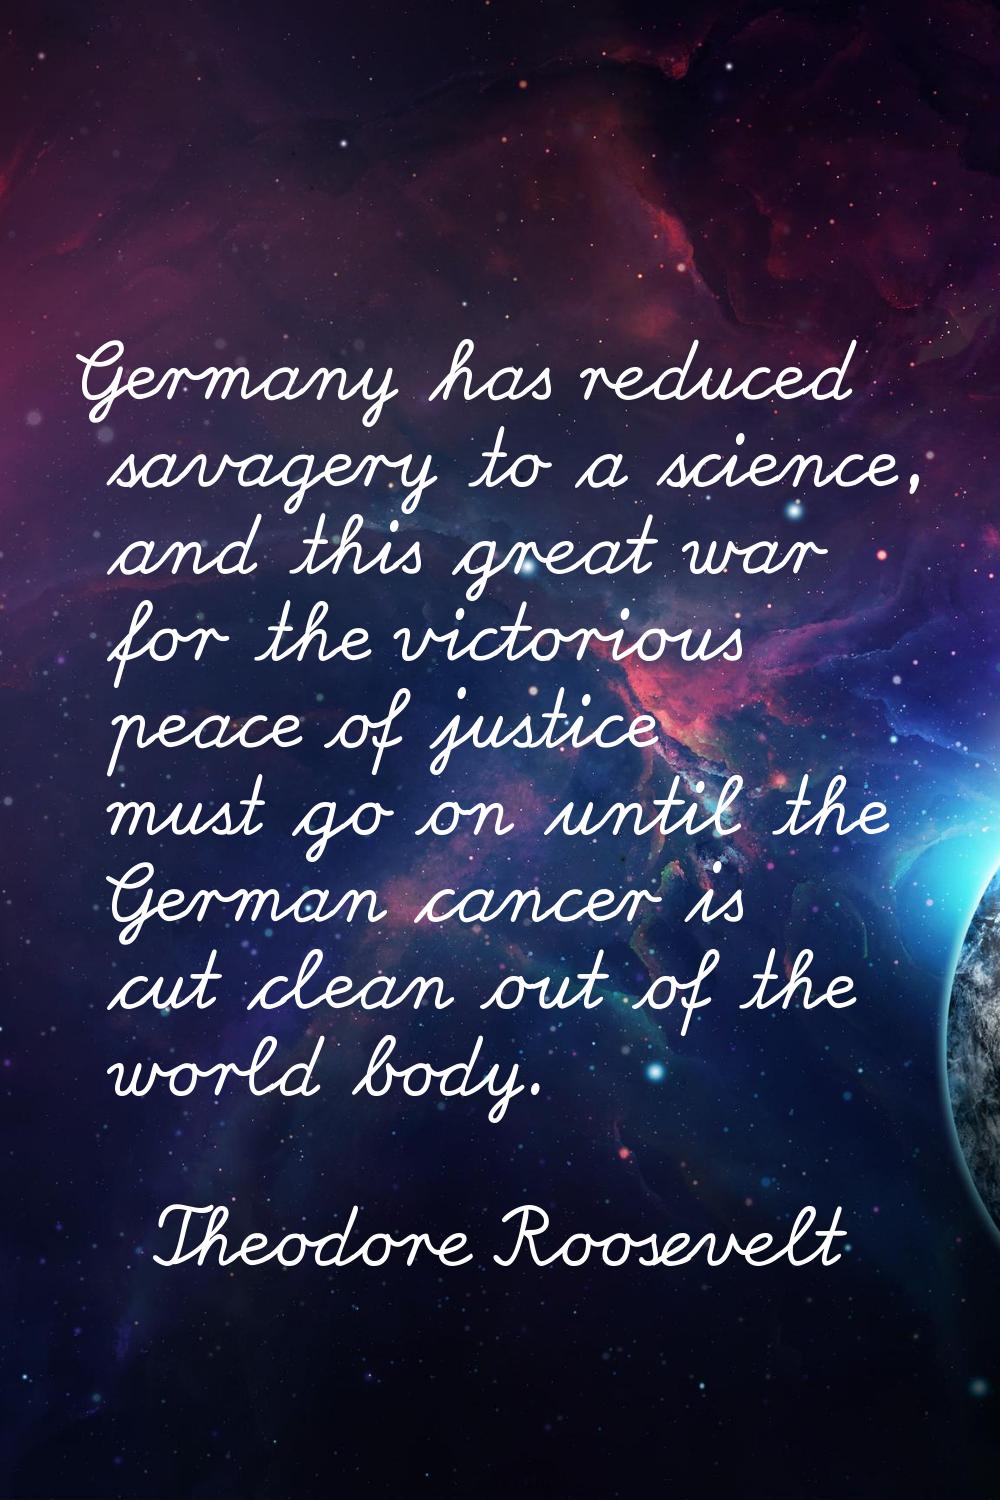 Germany has reduced savagery to a science, and this great war for the victorious peace of justice m